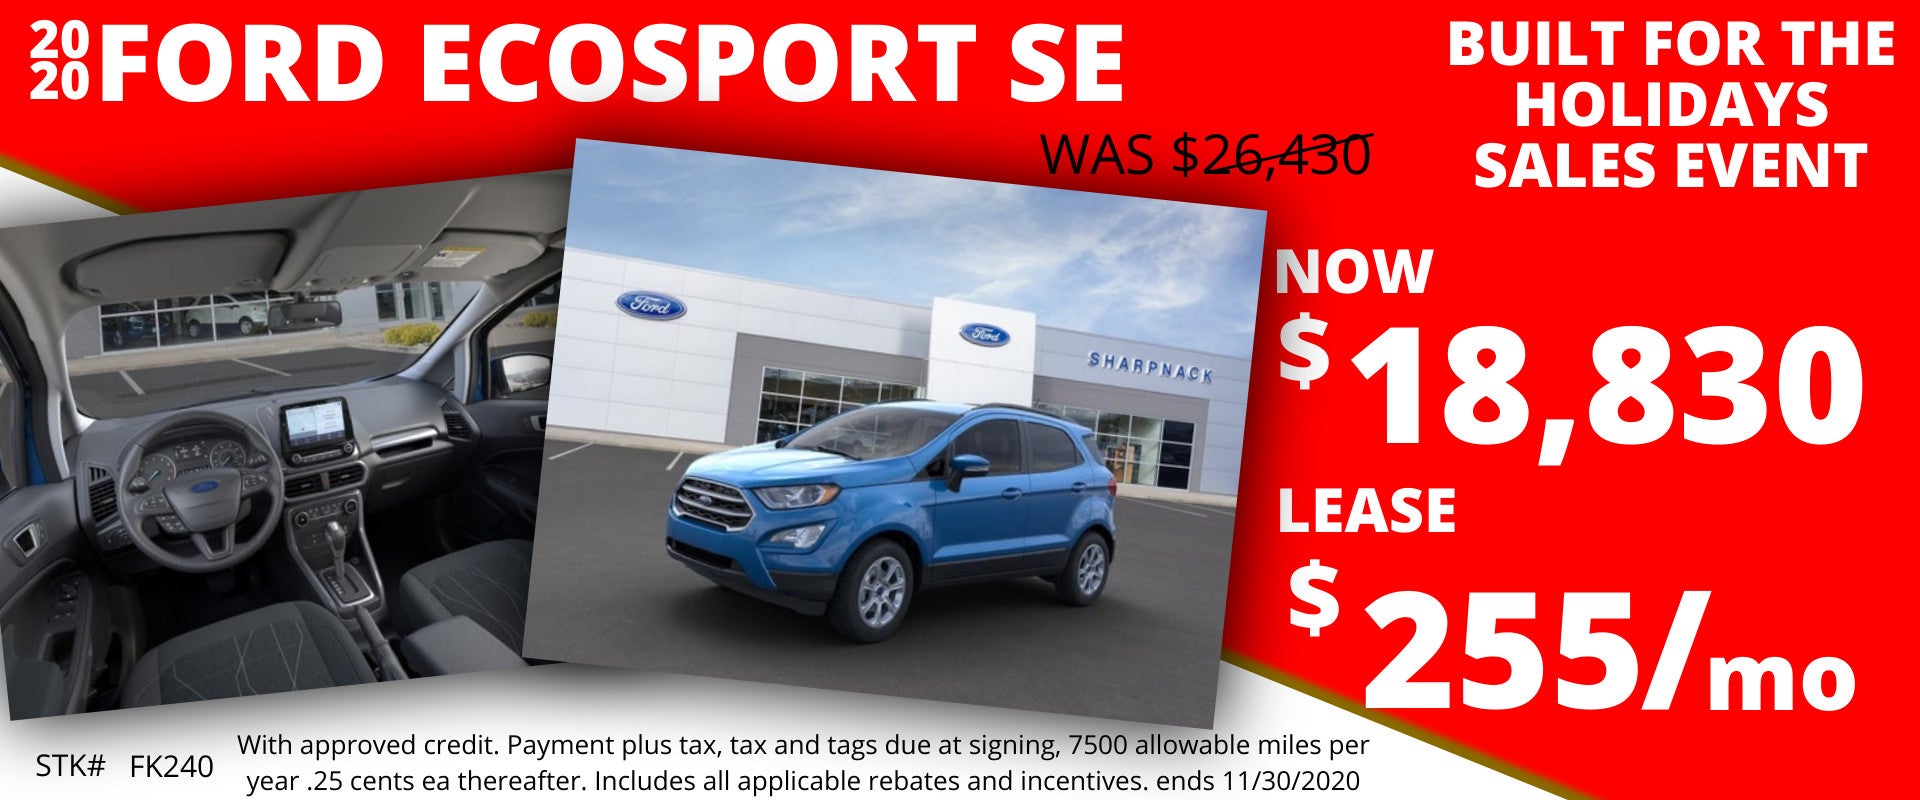 2020 Ford EcoSport Lease Specials